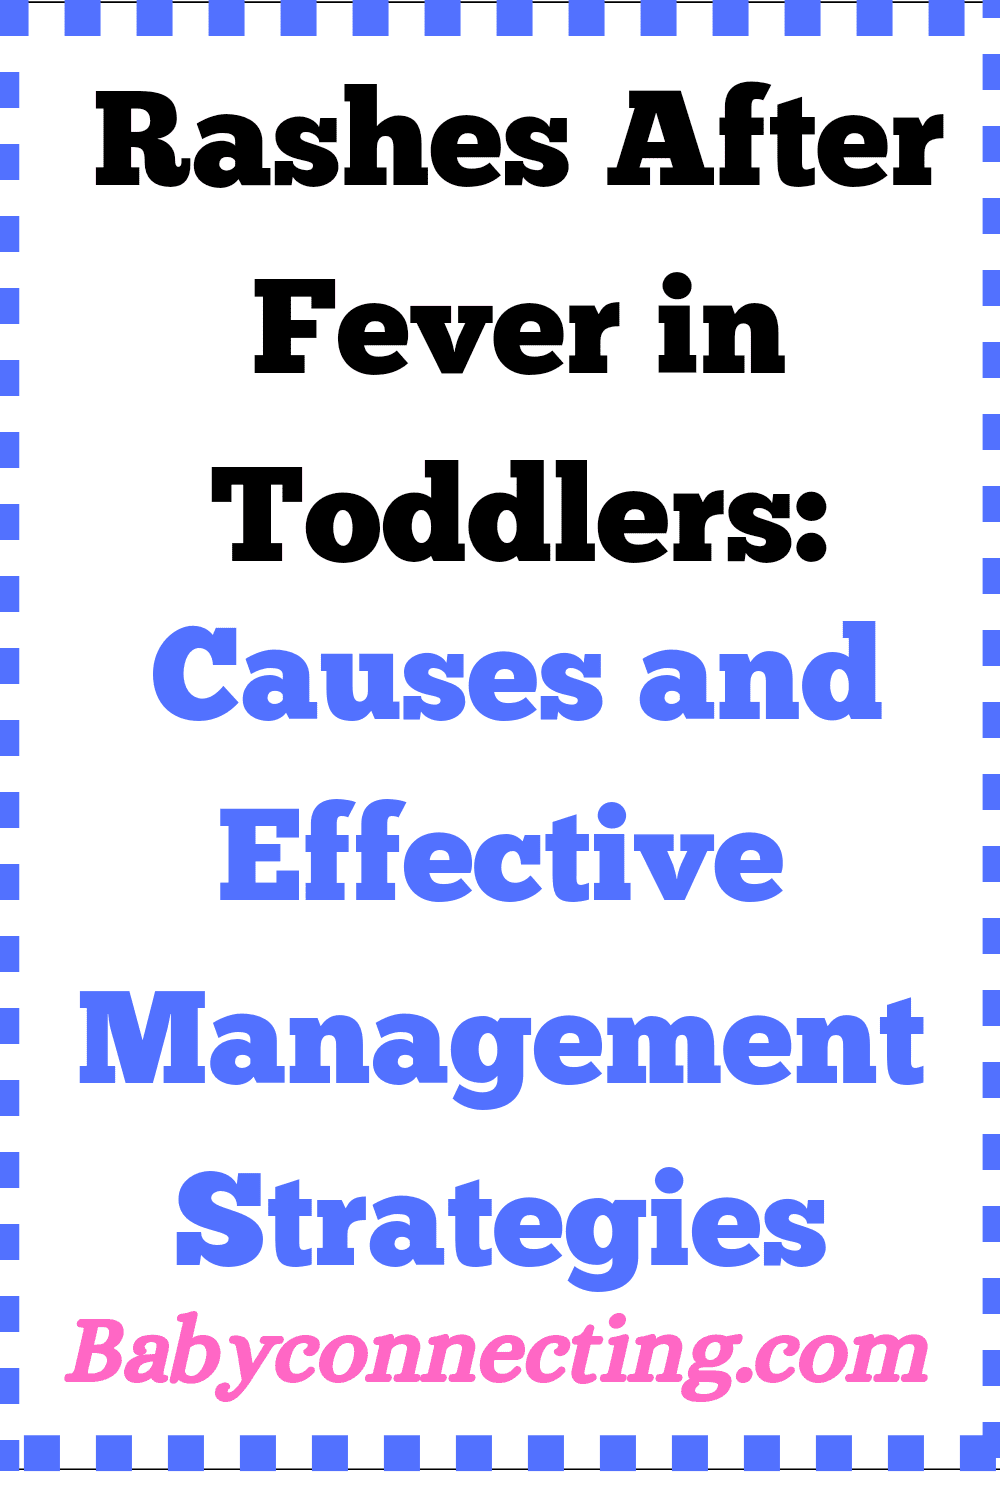 Rashes After Fever in Toddlers: Causes and Effective Management Strategies